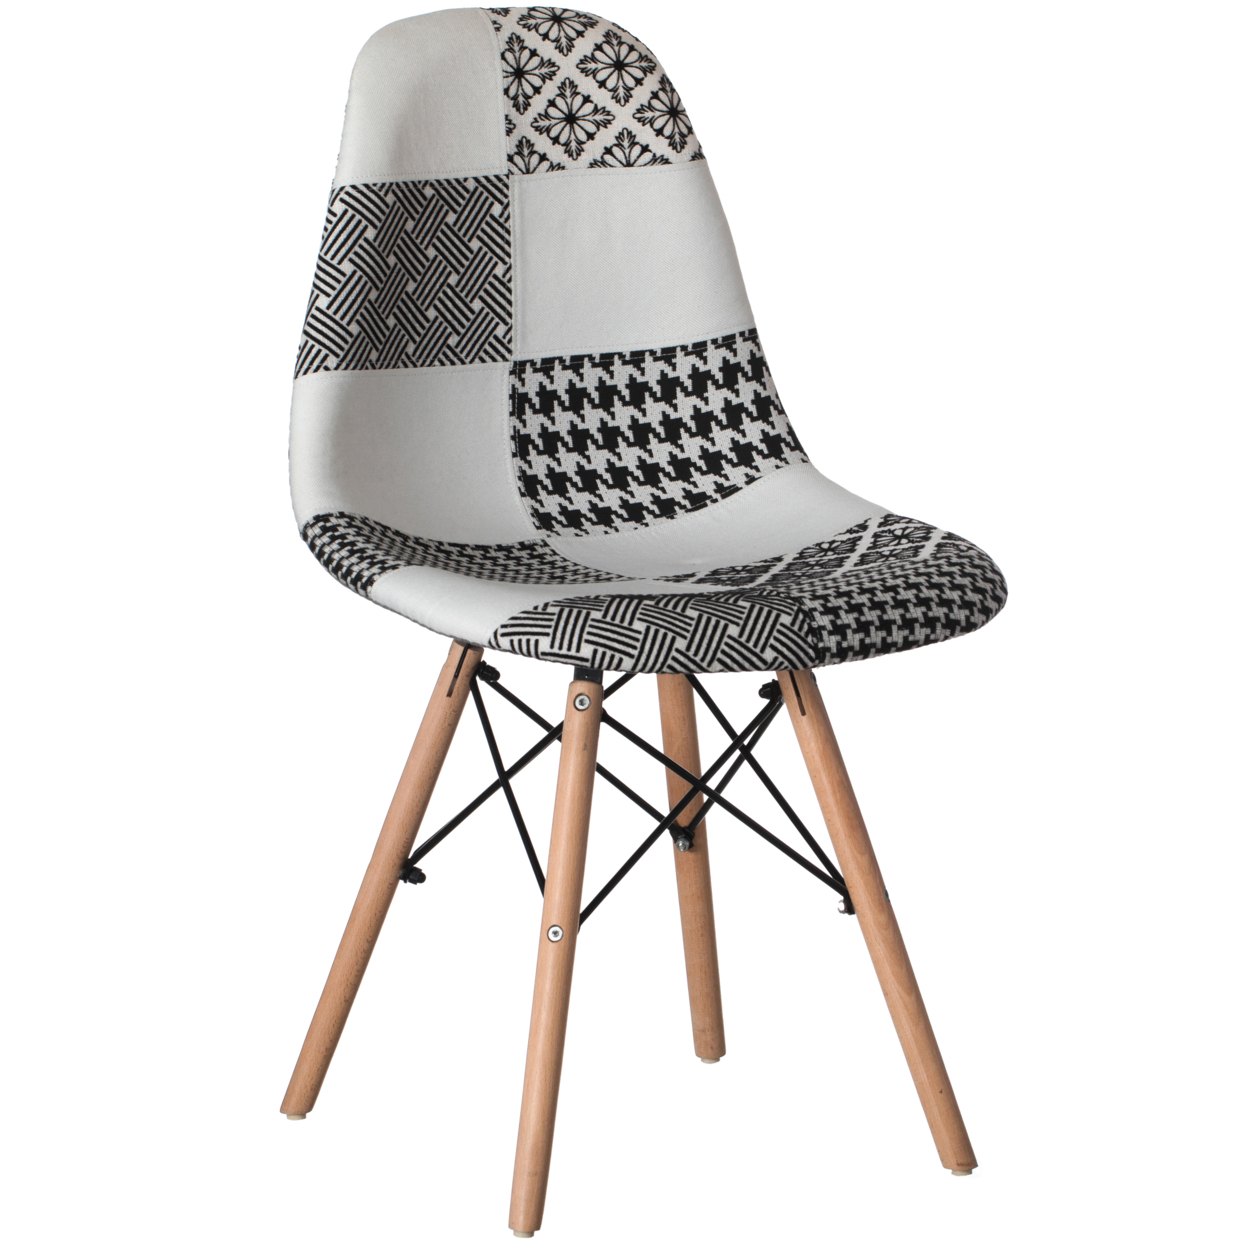 Modern Fabric Patchwork Chair With Wooden Legs For Kitchen, Dining Room, Entryway, Living Room With Black & White Patterns - Single